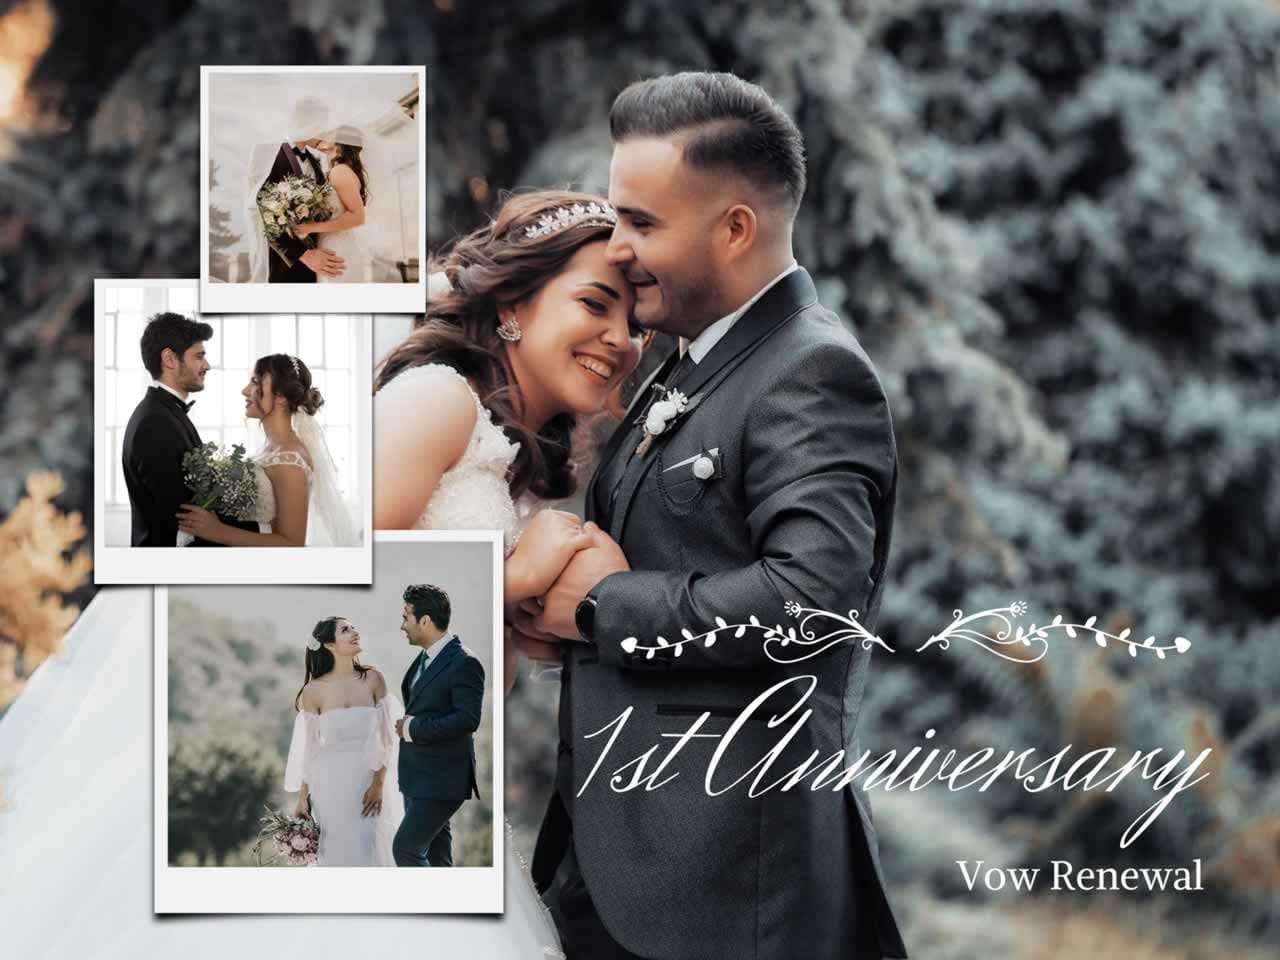 Planning a Meaningful 1st Anniversary Vow Renewal